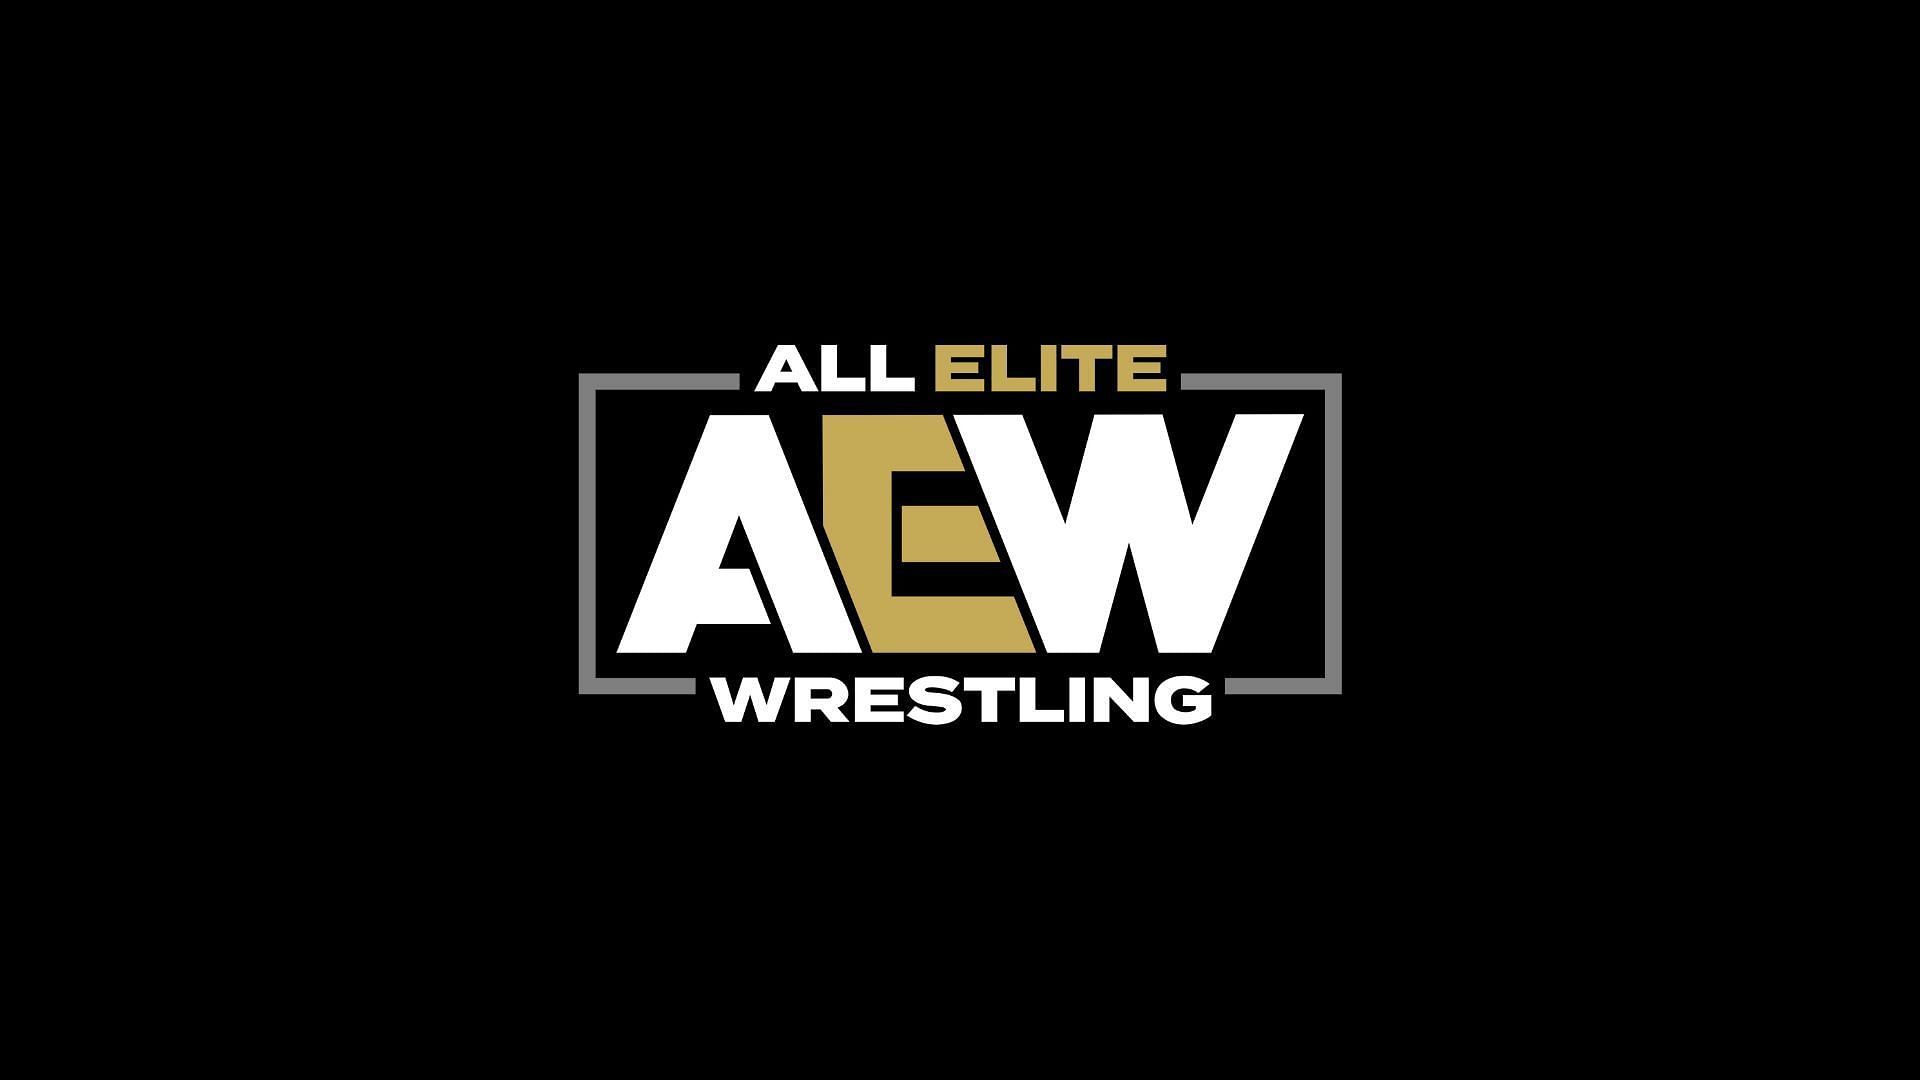 Veteran says he wants to work in AEW backstage after retirement